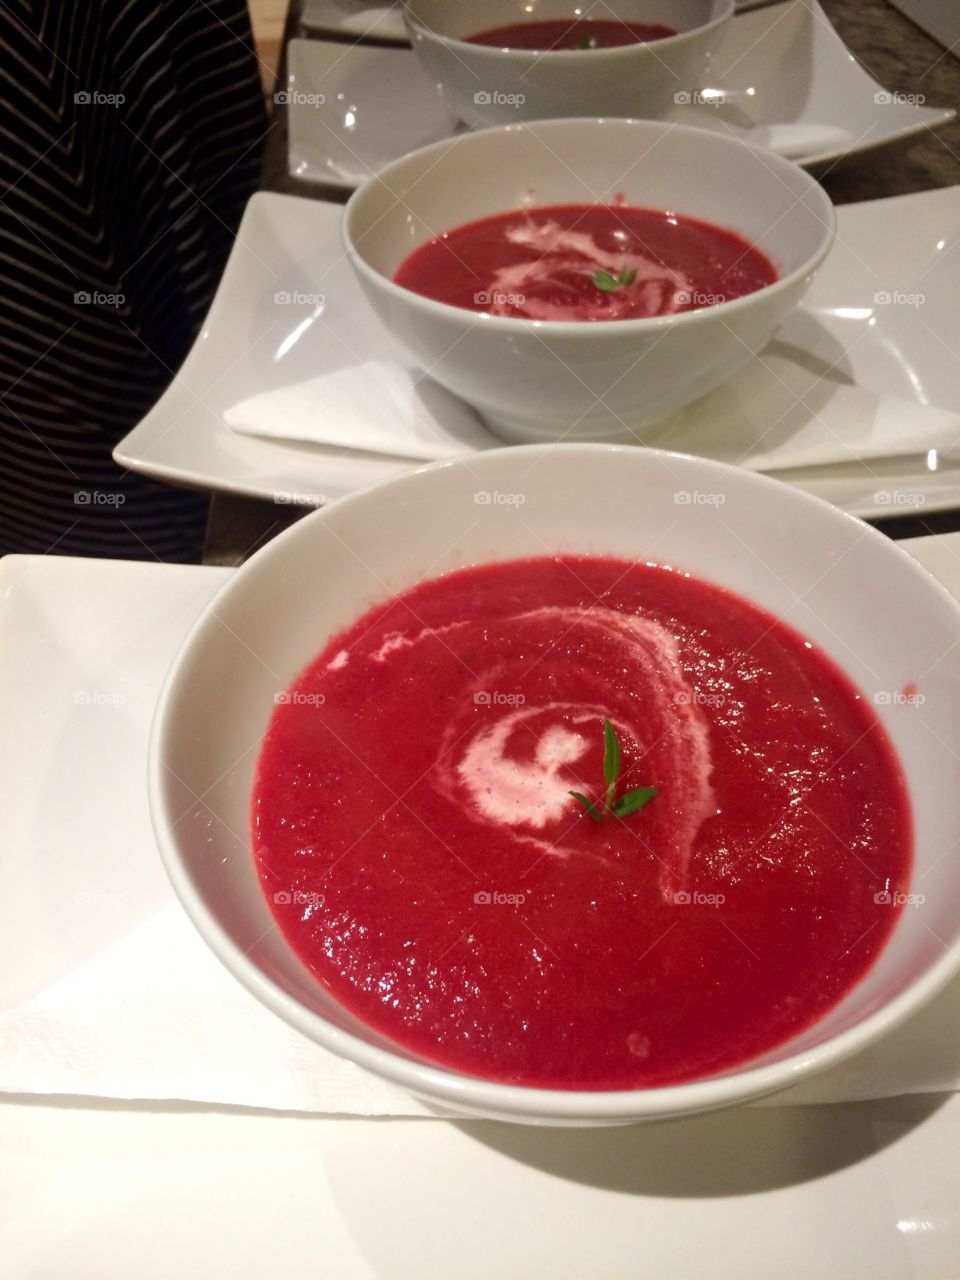 Second course, Beetroot Soup with Pistachios 